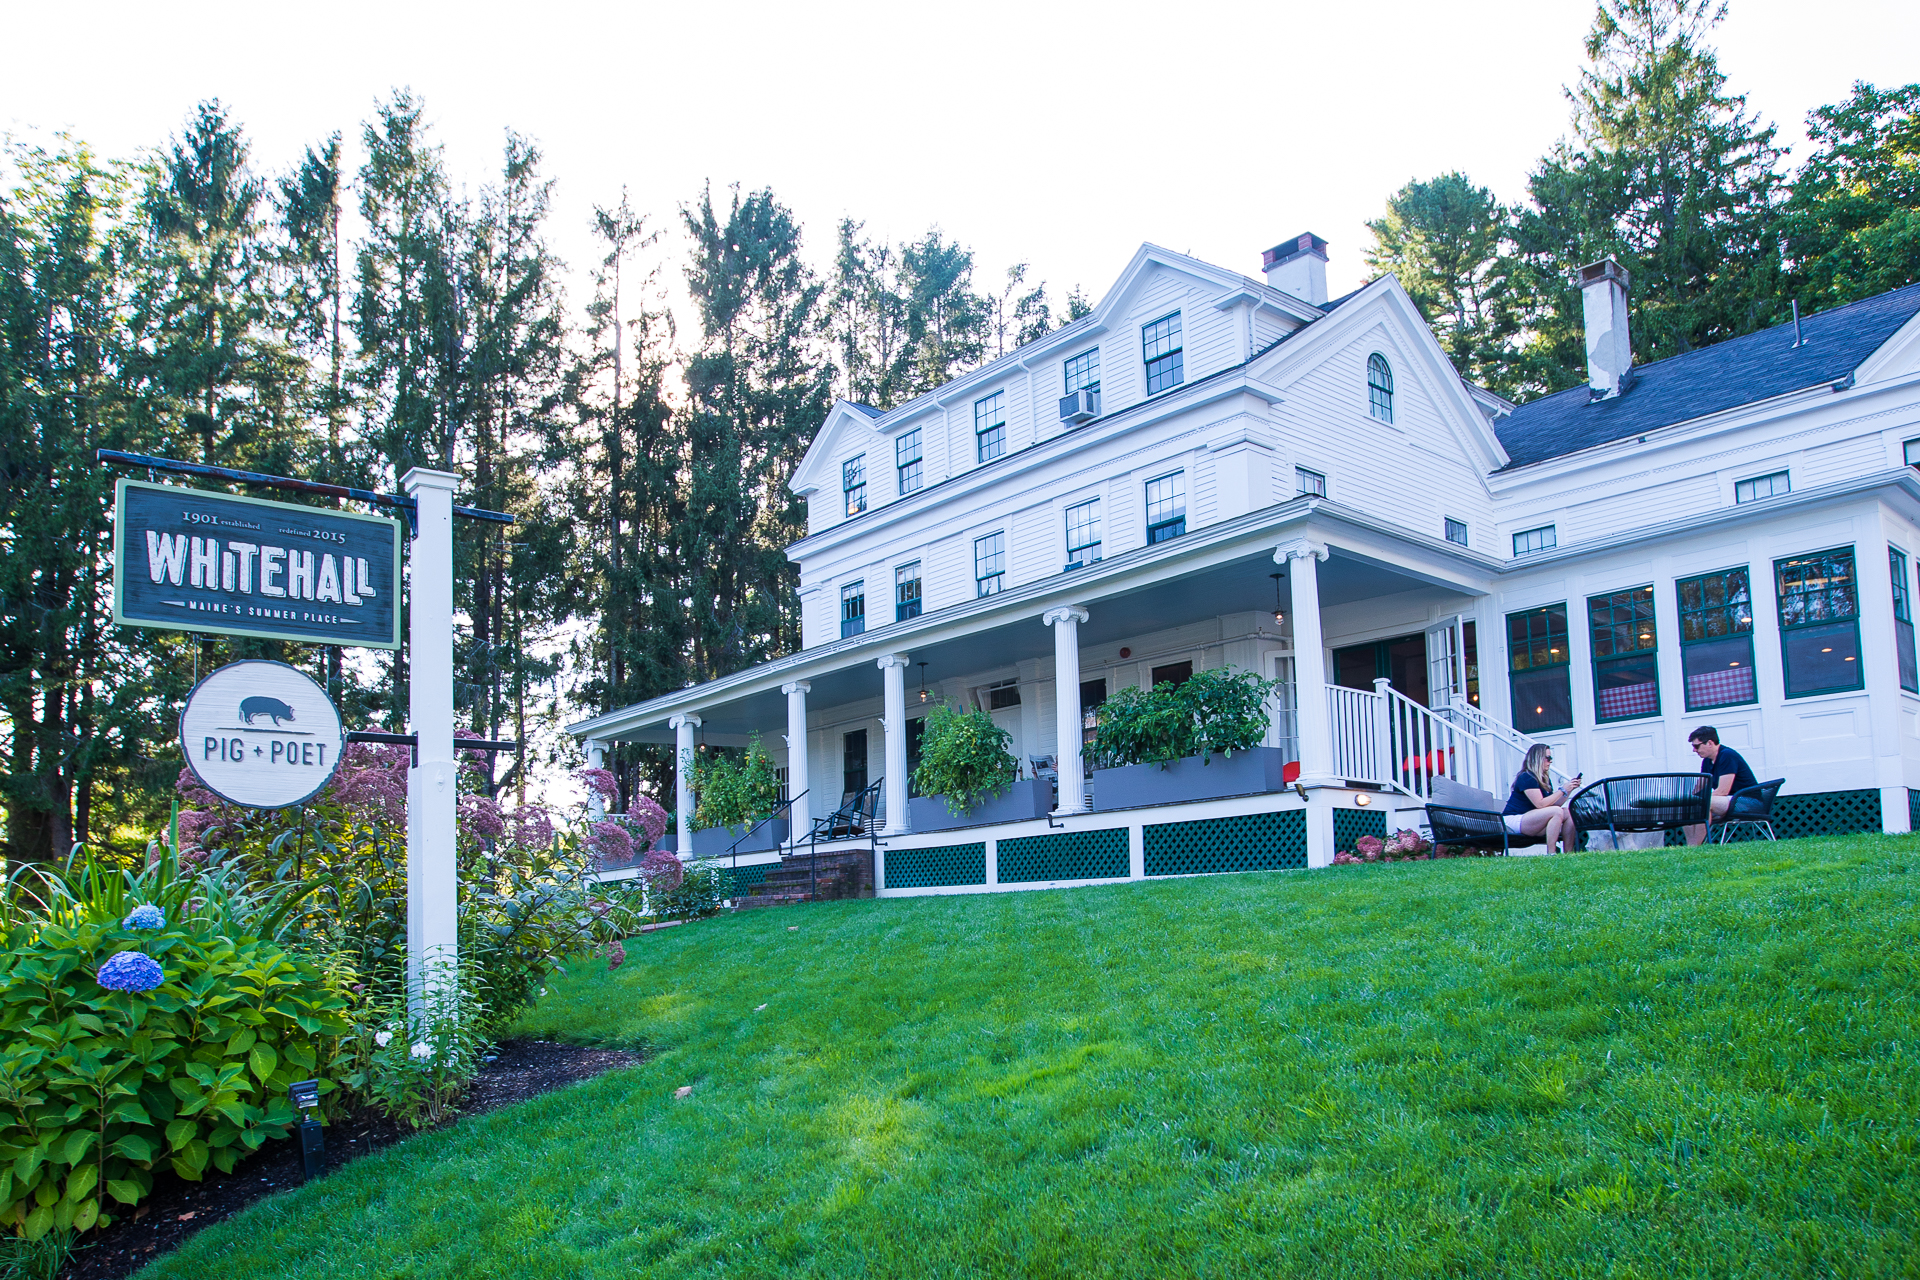 Be Charmed by Whitehall, Maine's Summer Place | Camden, Maine